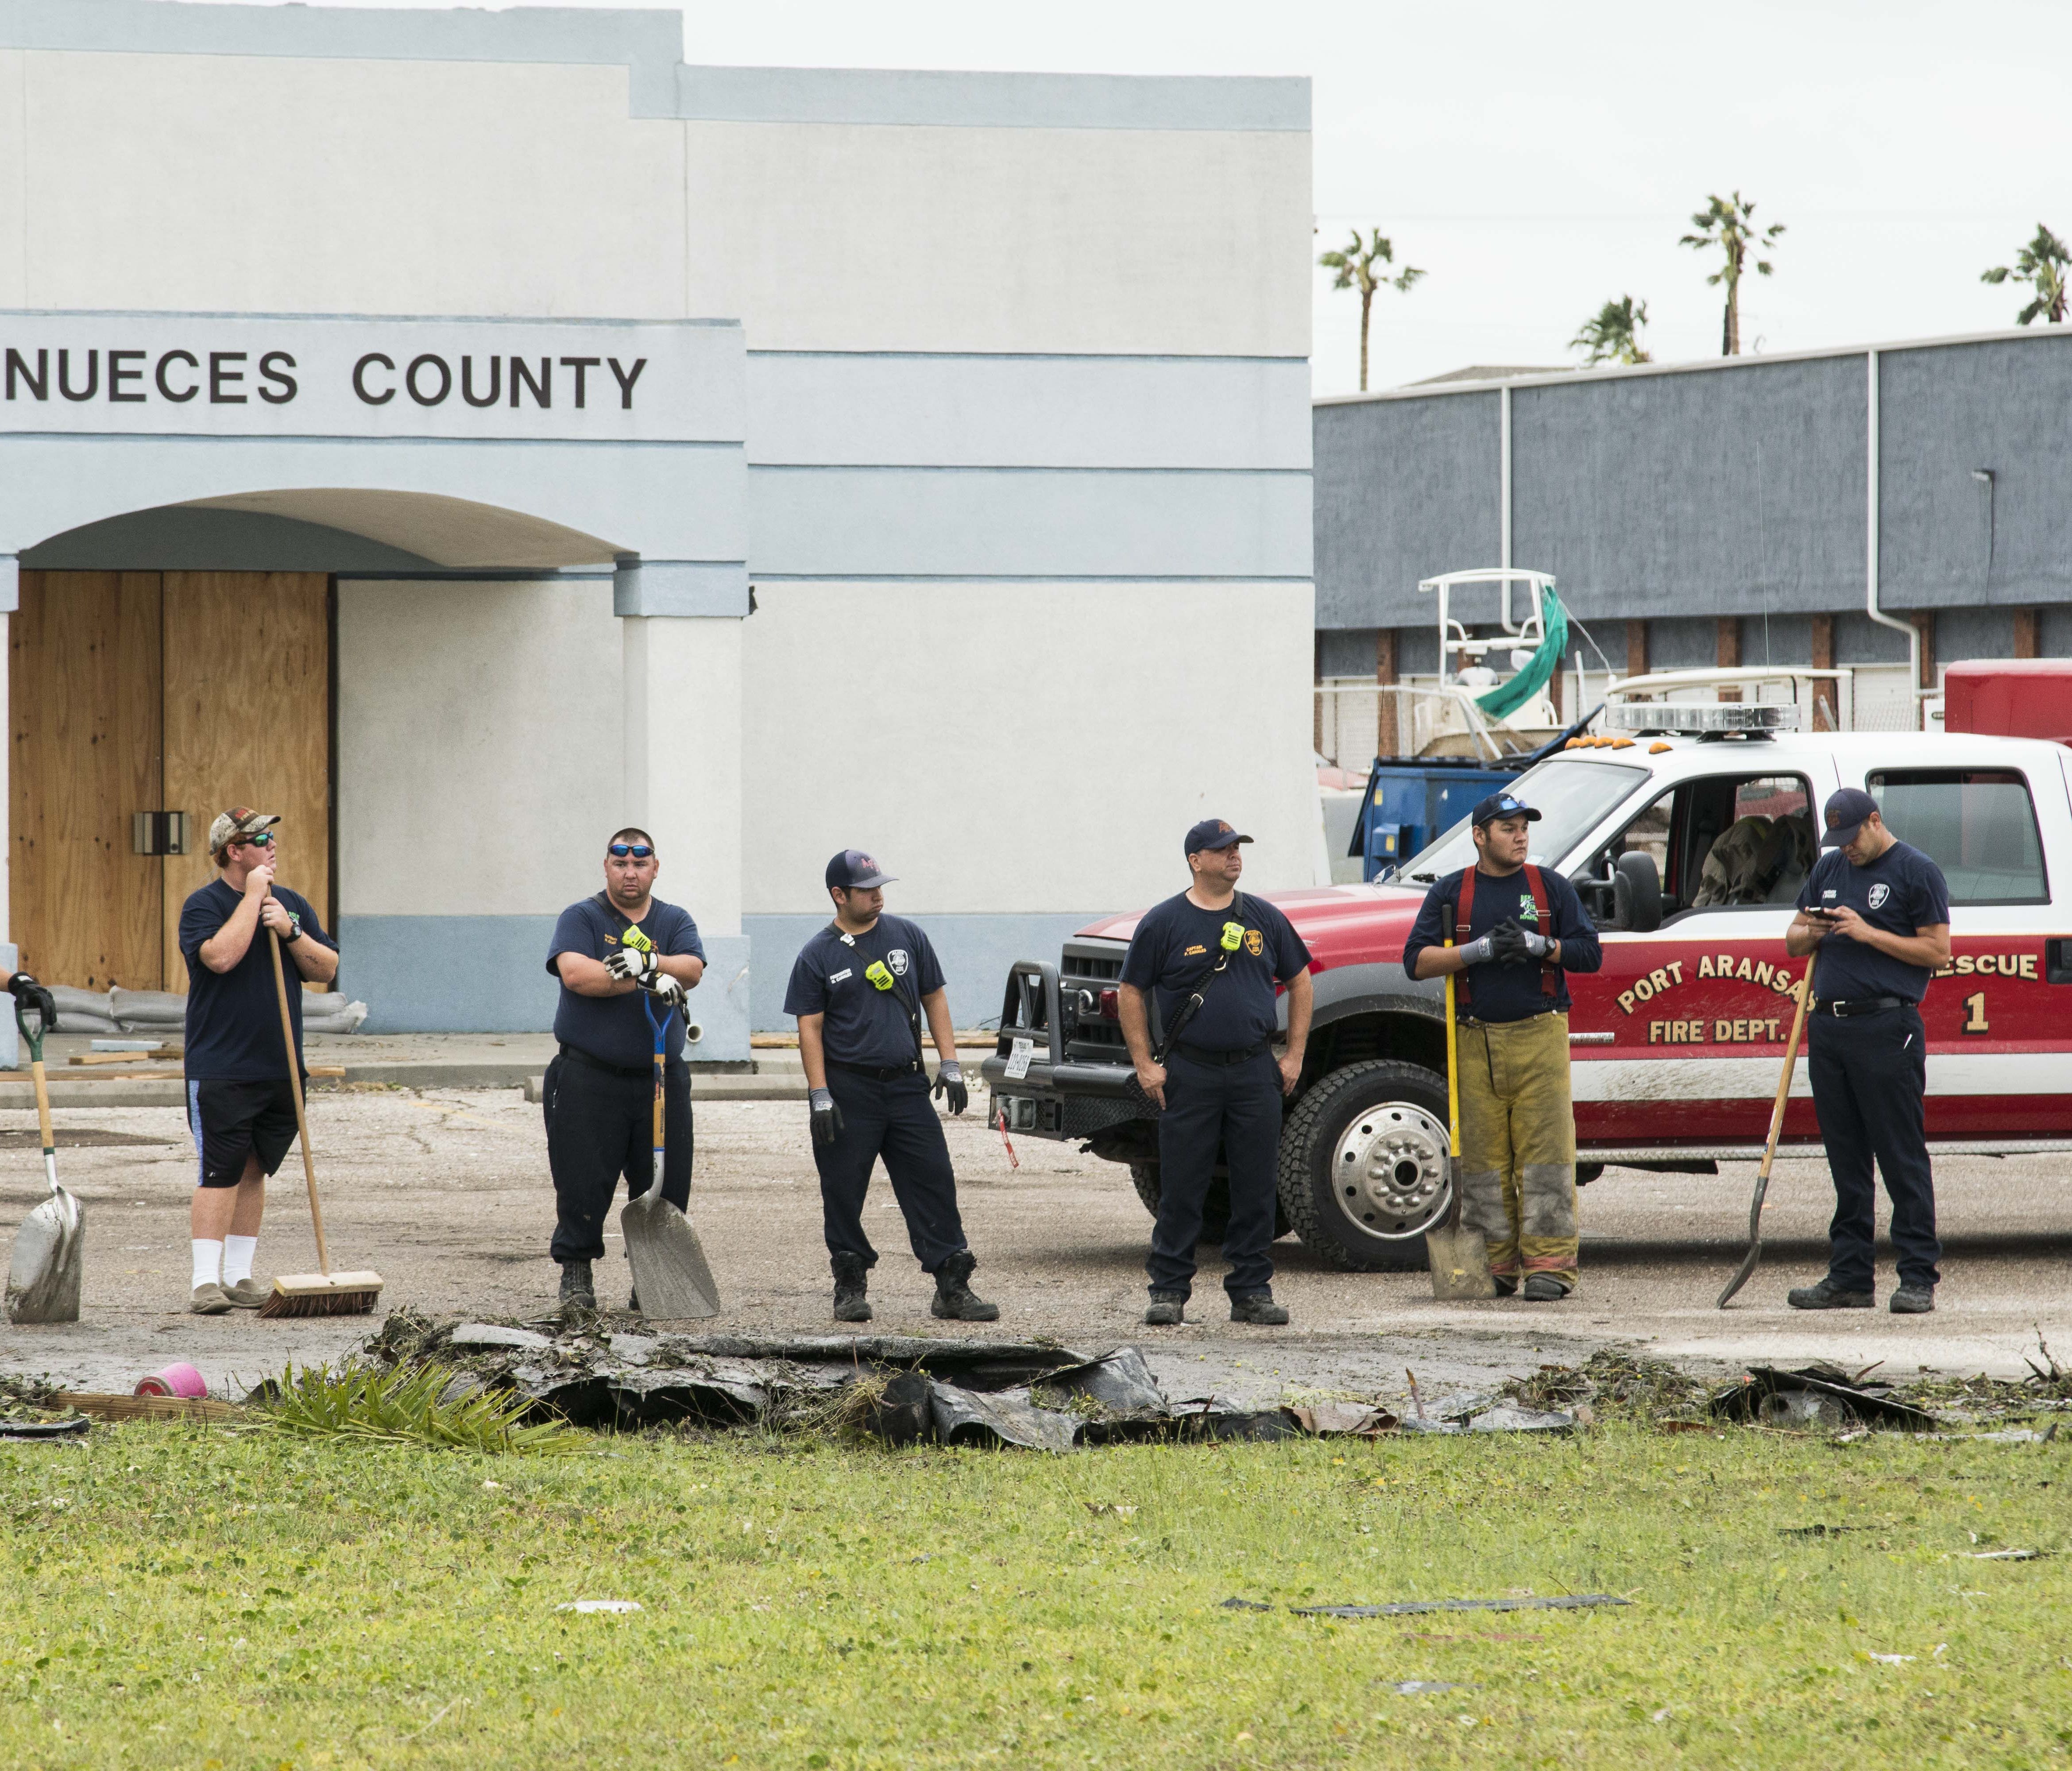 A search-and-rescue team works in the aftermath of Hurricane Harvey at Port Aransas, a Gulf Coast Texas town, on Aug. 27, 2017.